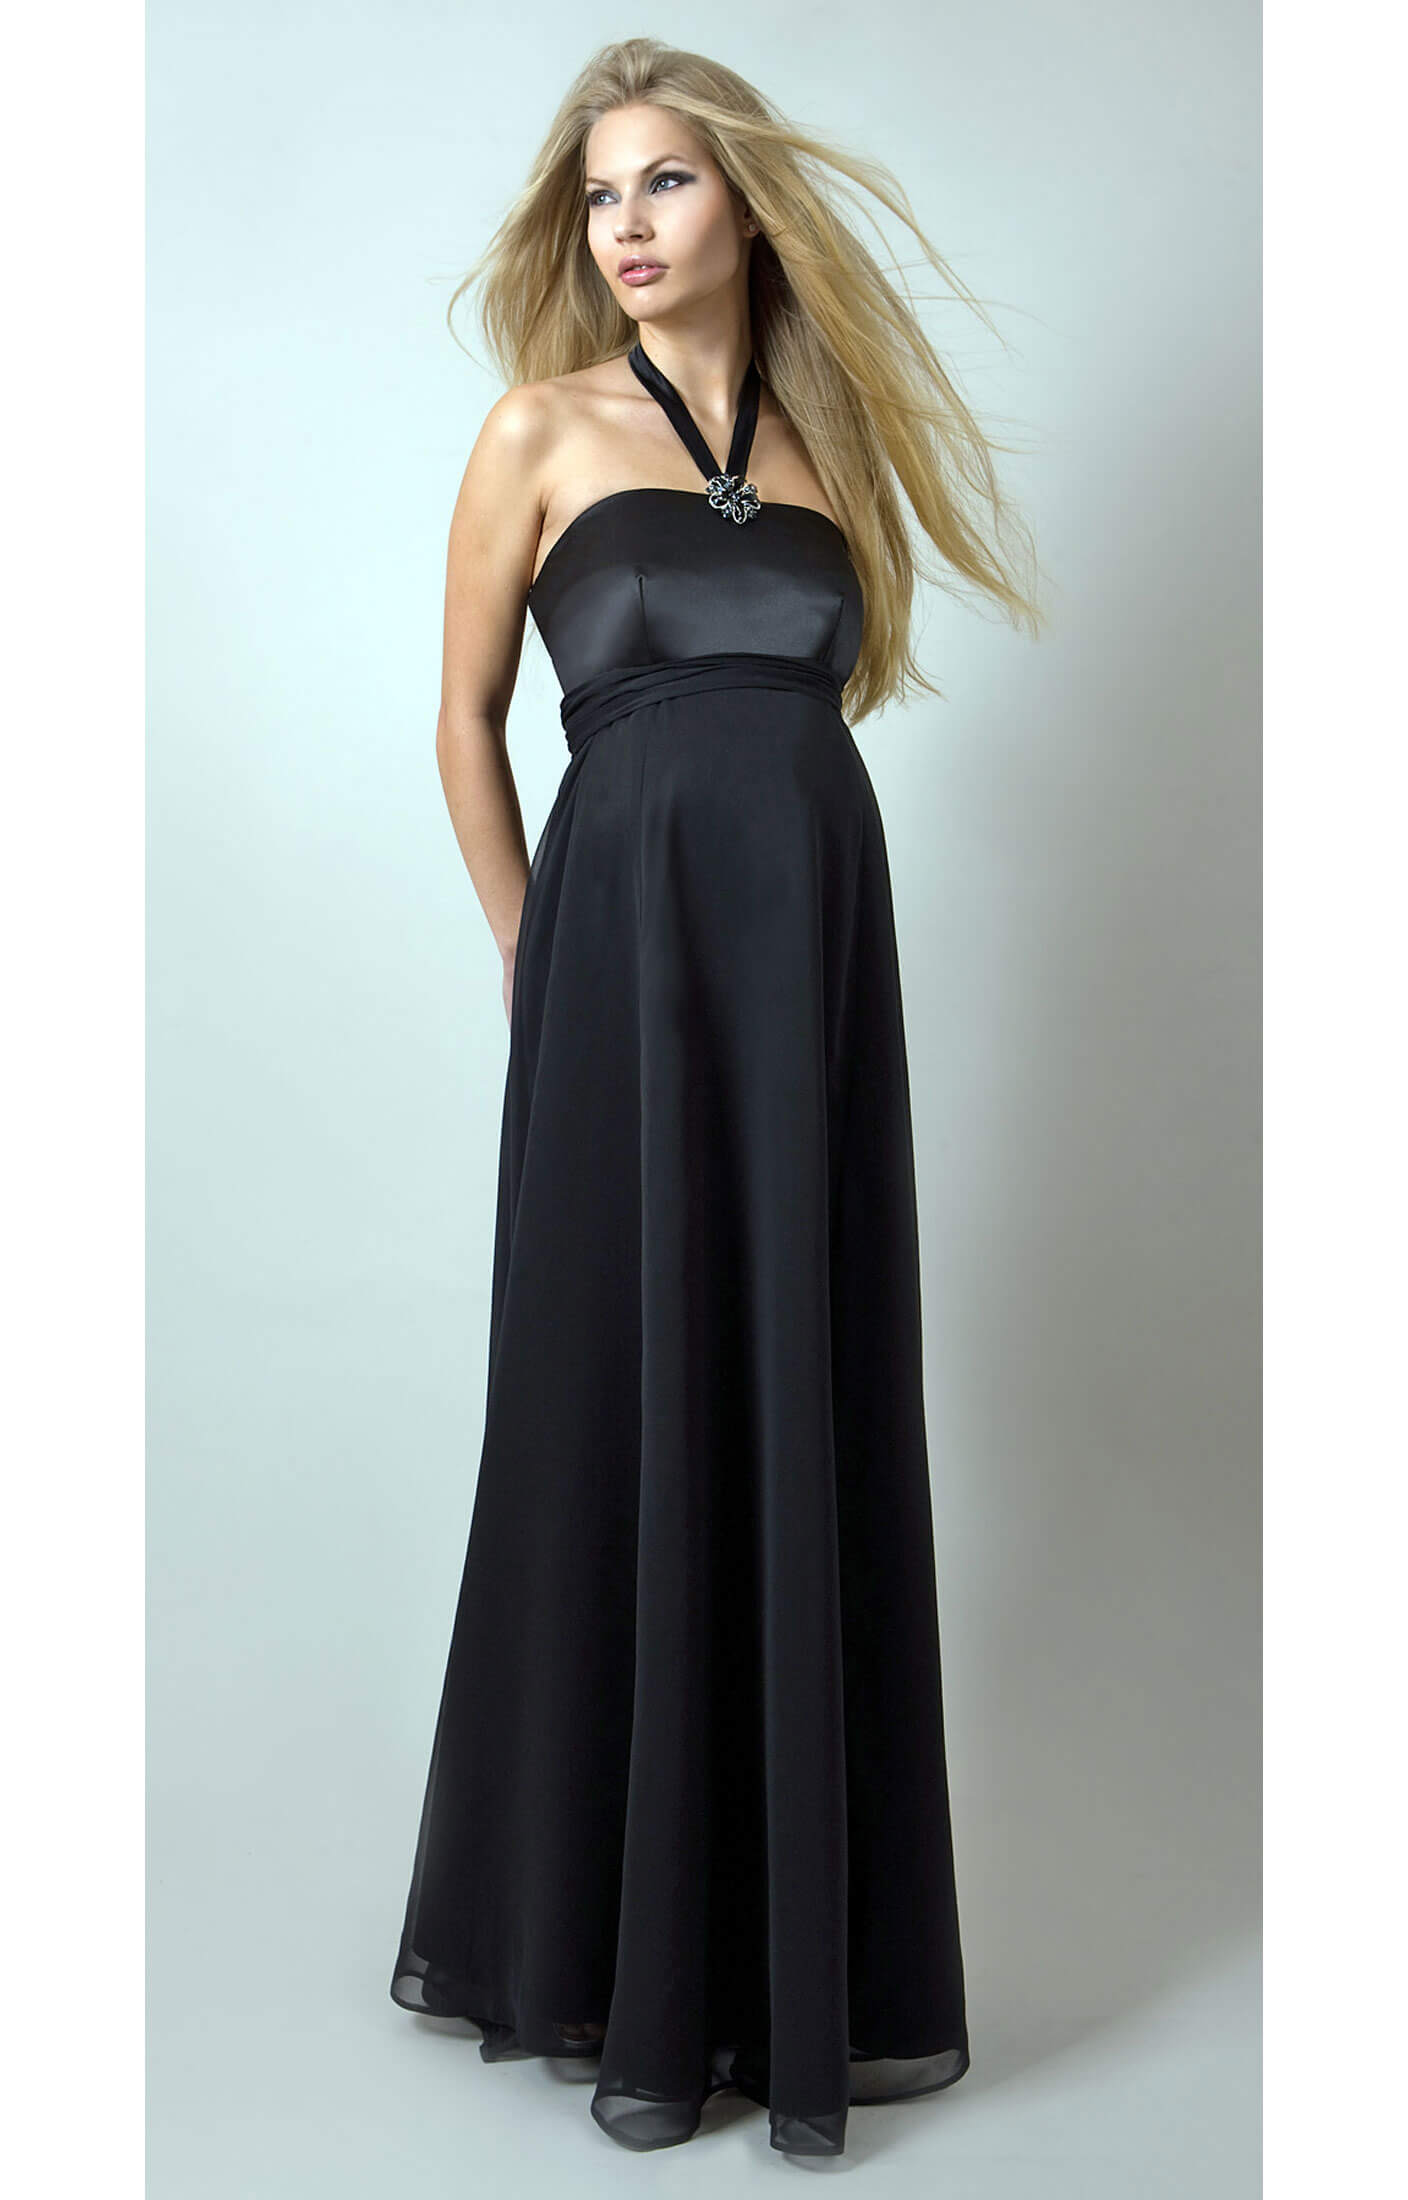 Black Tie Maternity Gown - Maternity Wedding Dresses, Evening Wear and  Party Clothes by Tiffany Rose US